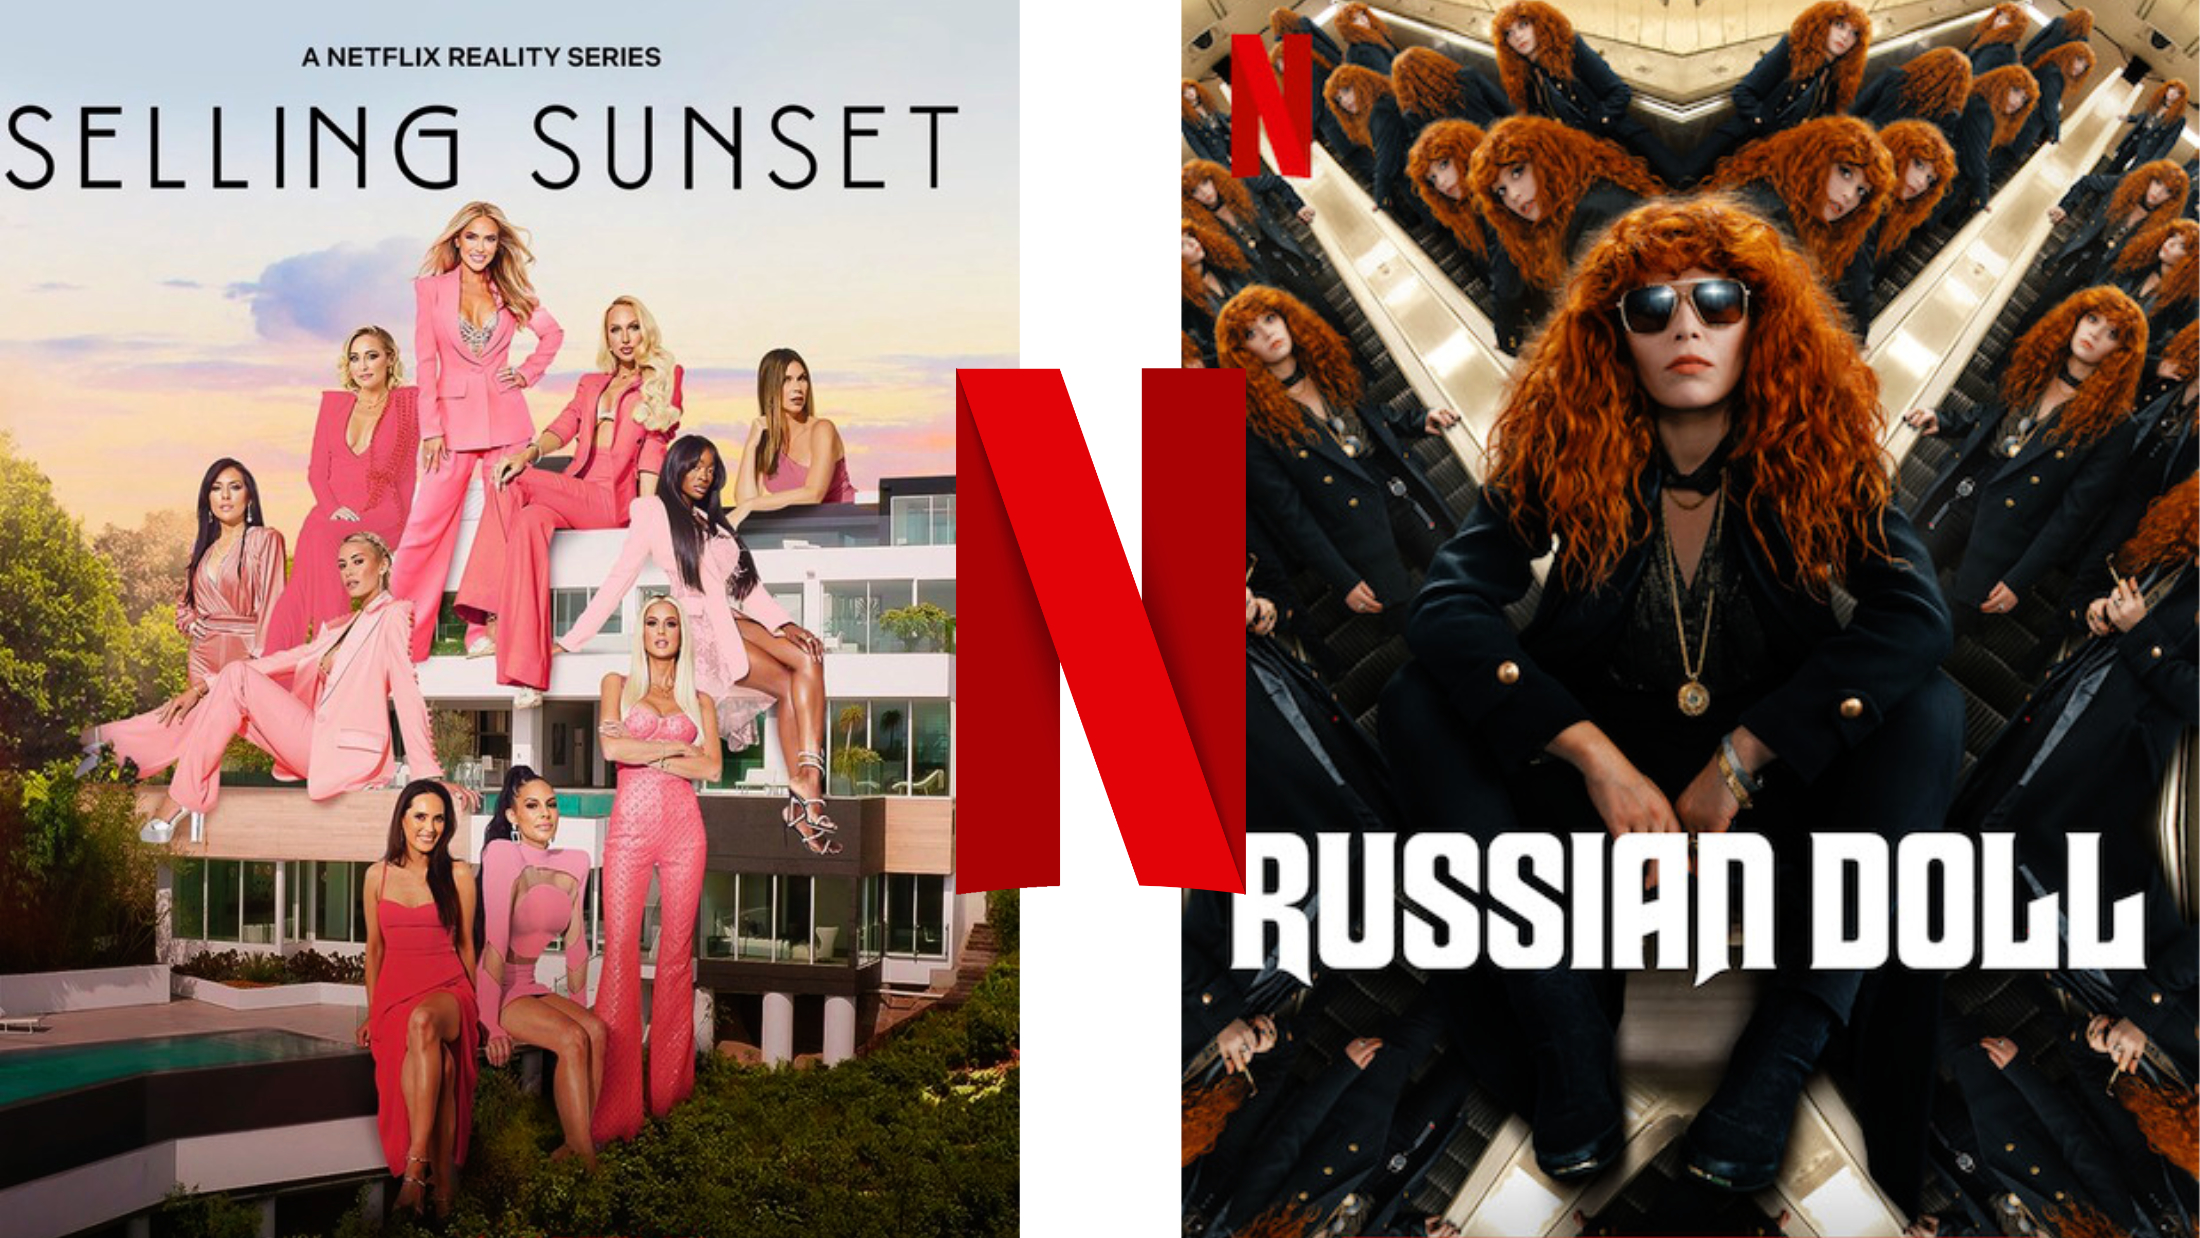 New Netflix Canada Releases This Week [22 avril]

